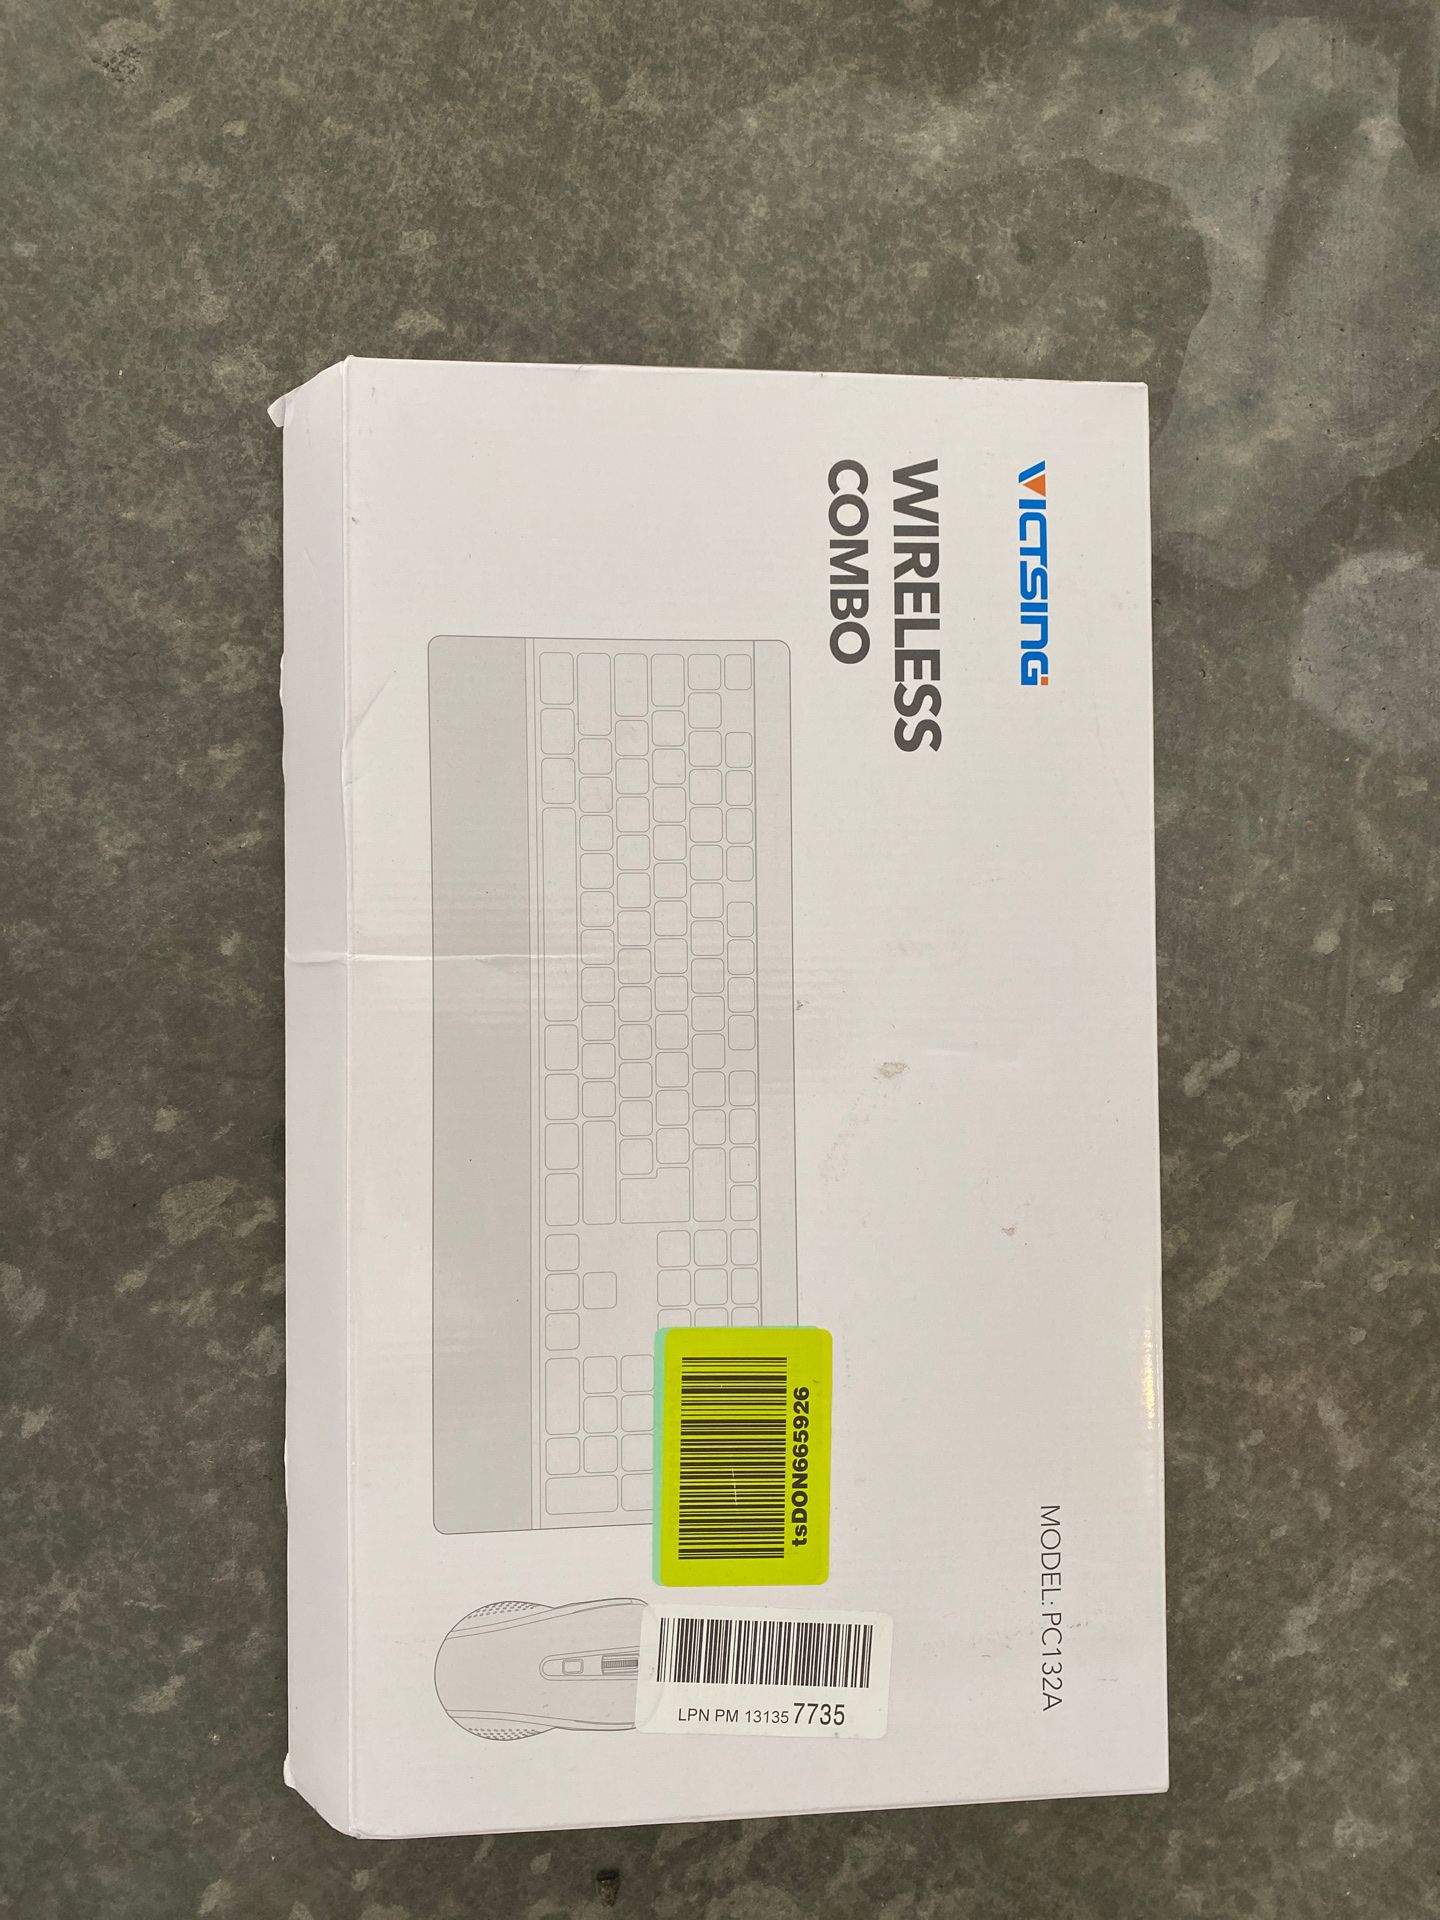 Wireless keyboard with mouse